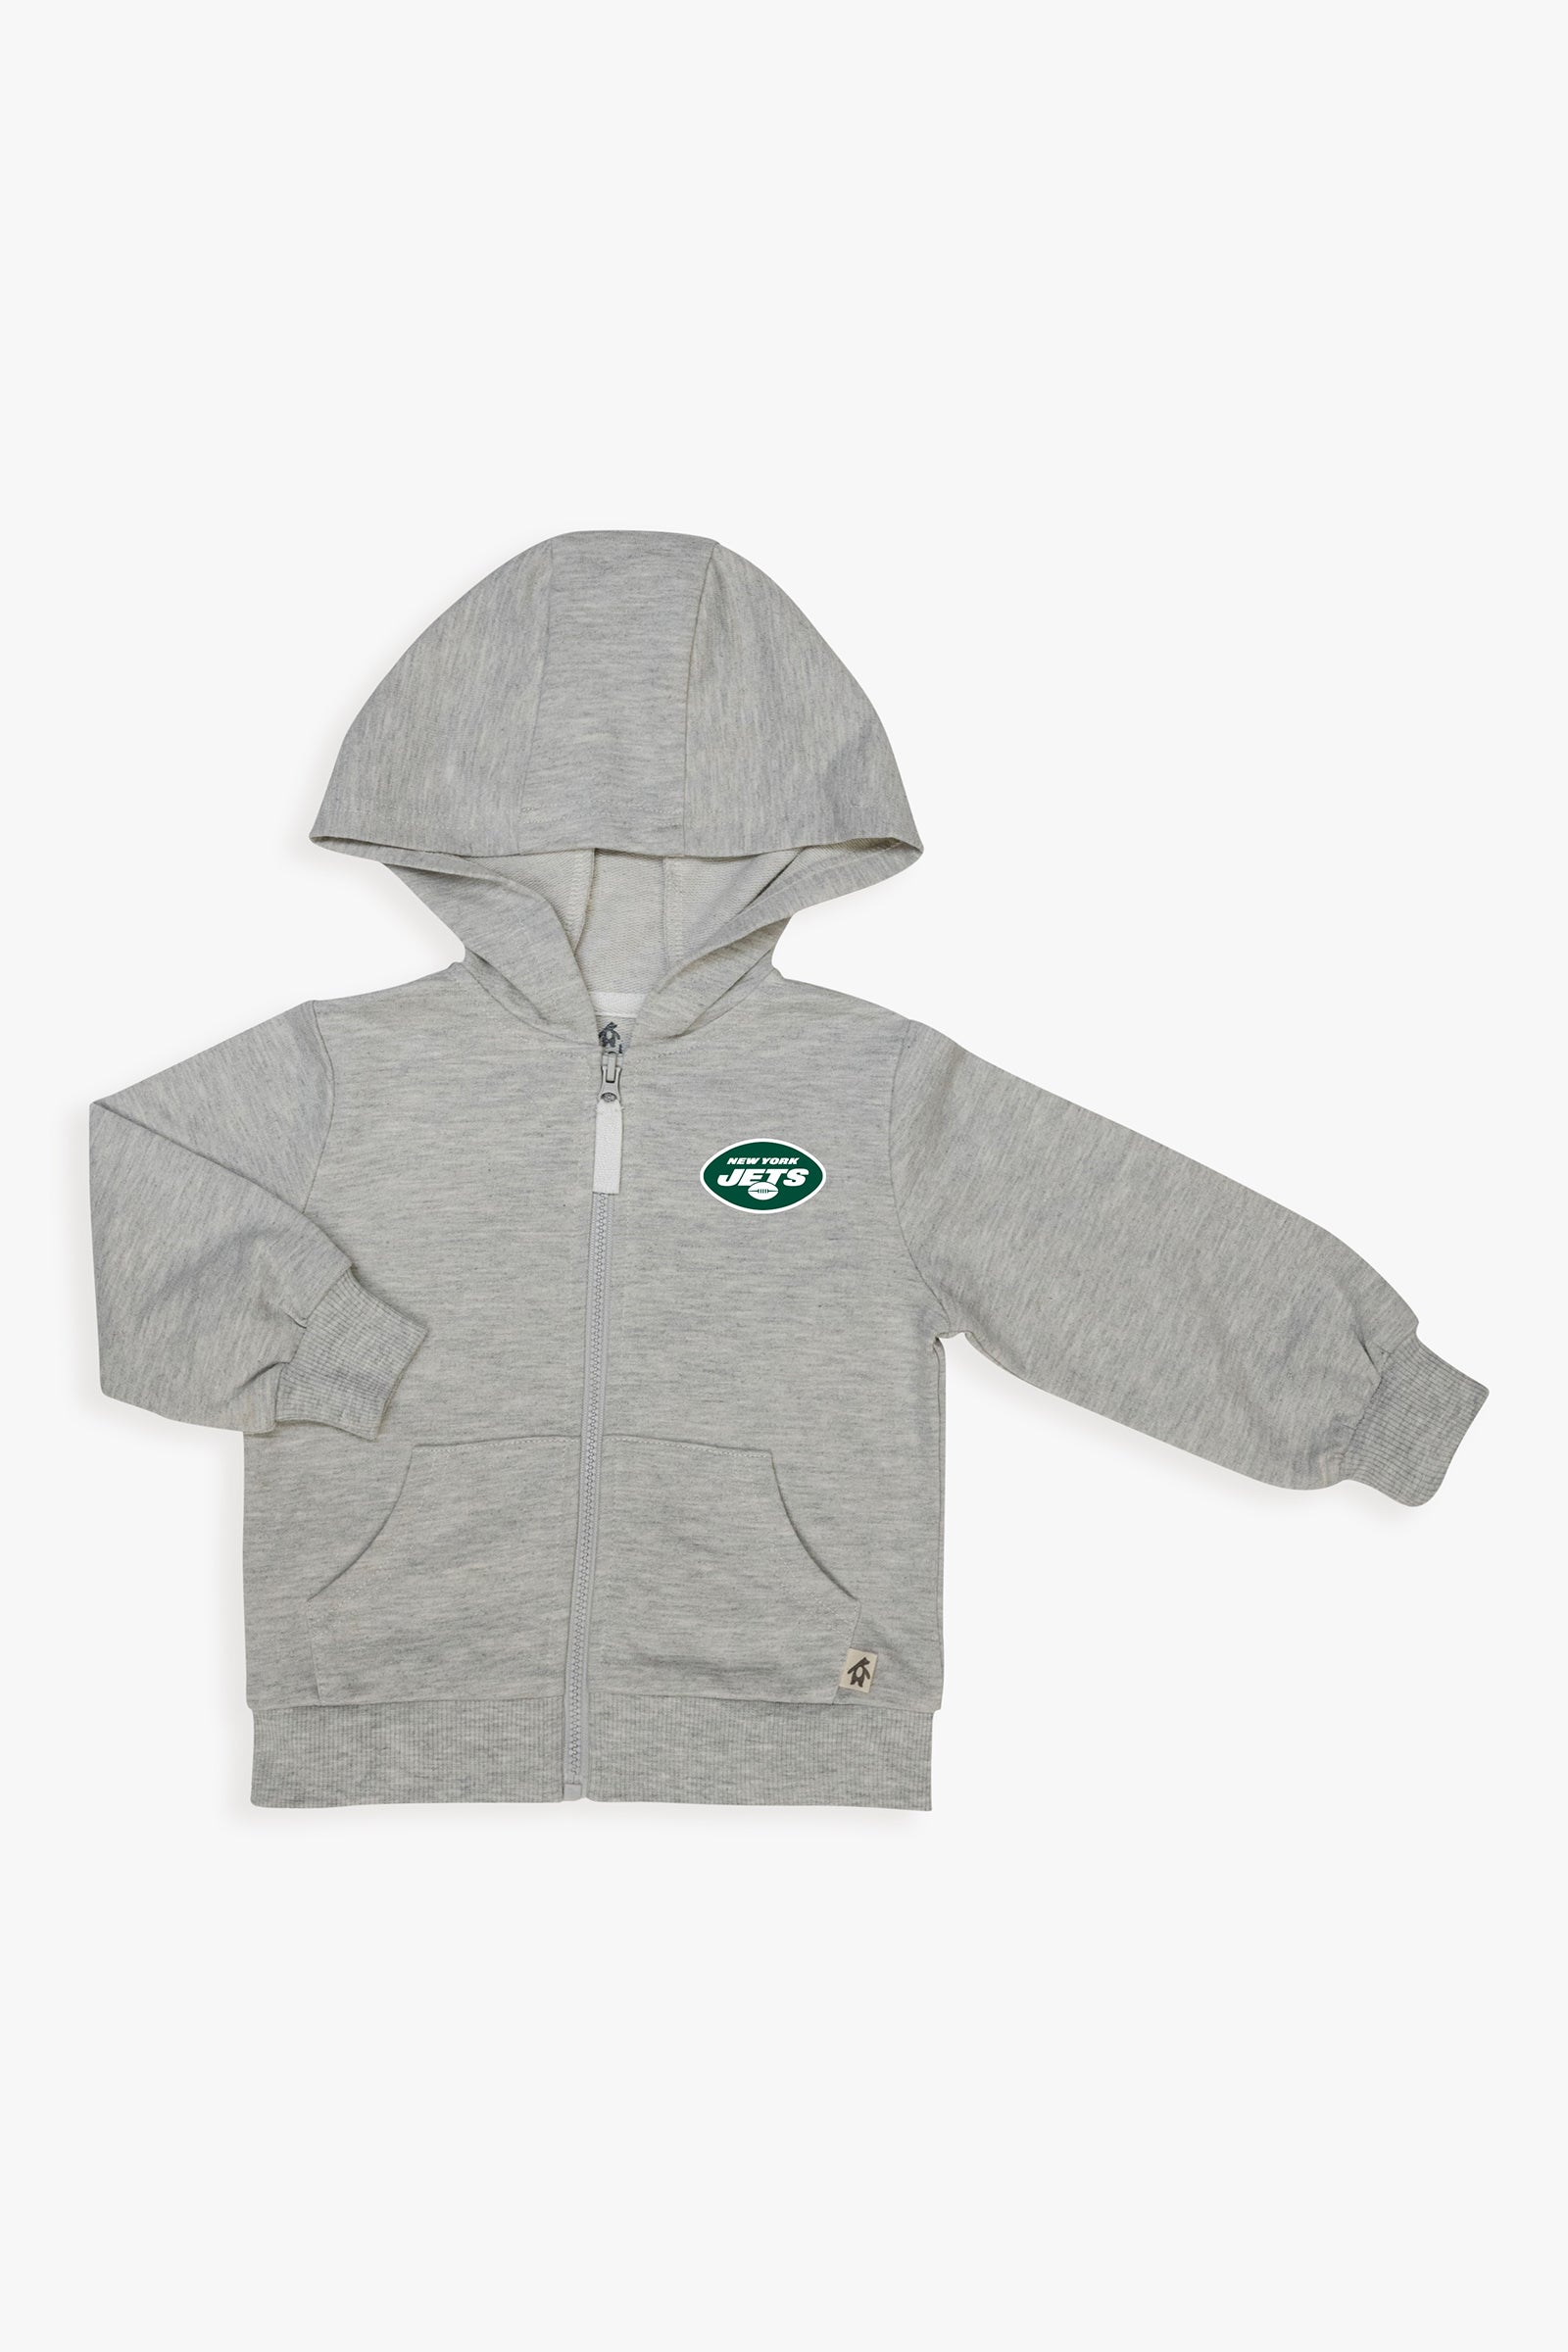 NFL Toddler Unisex Grey French Terry Zip-Up Hoodie